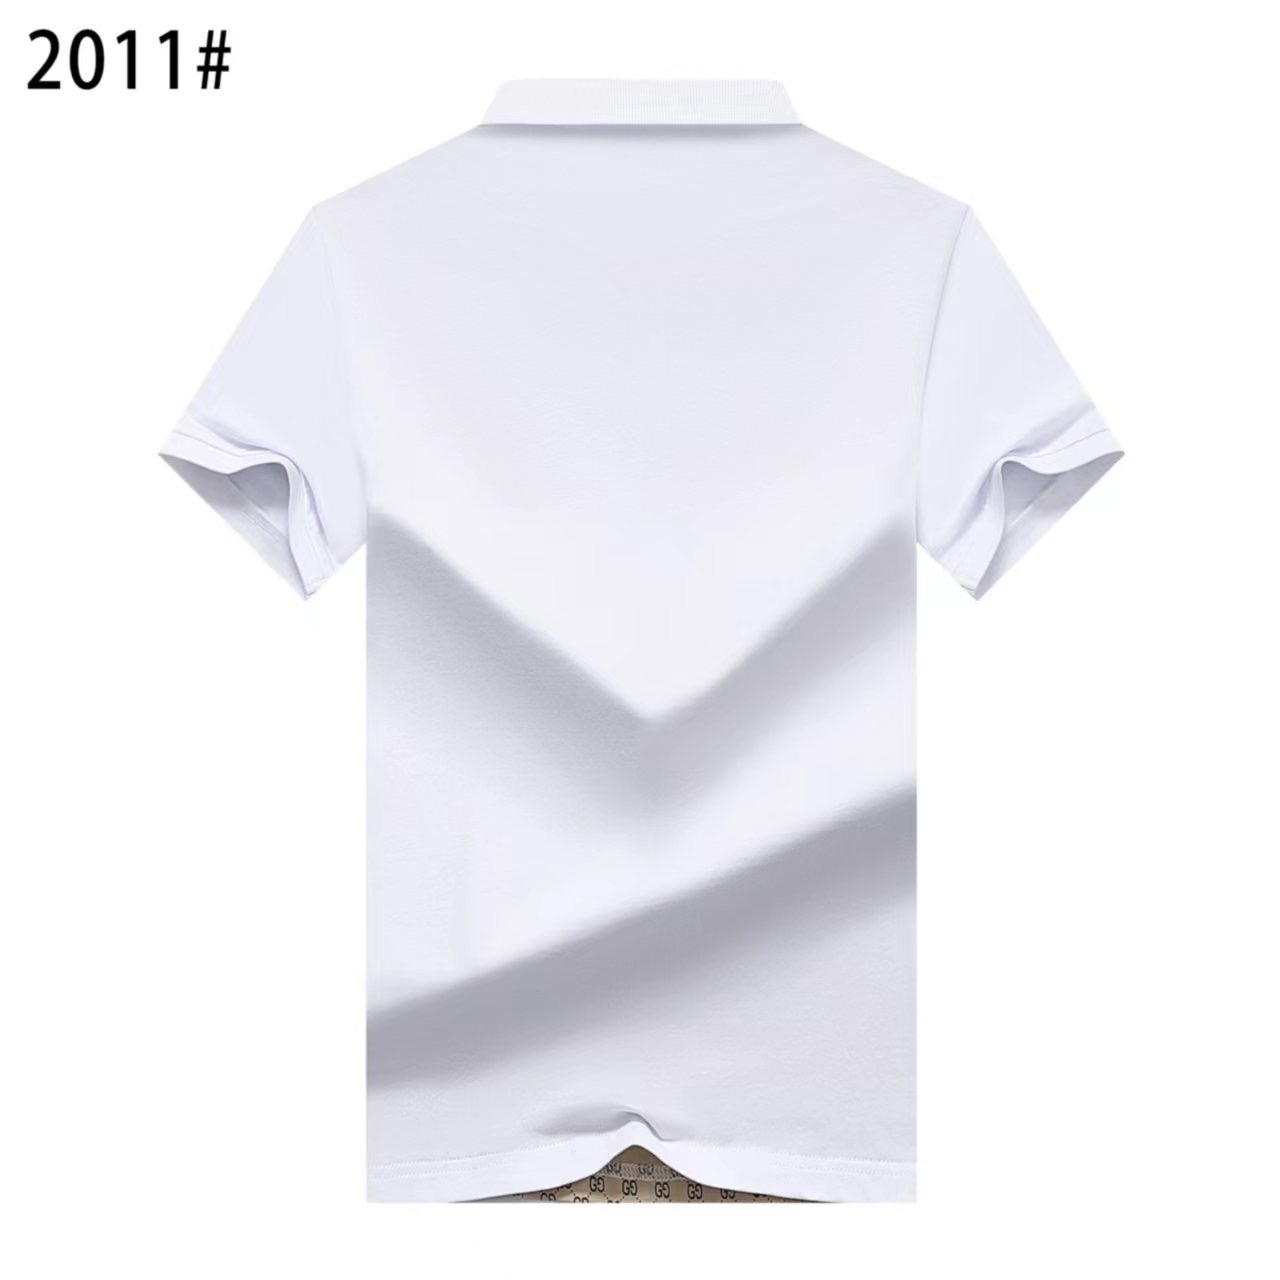 Gucci Short Sleeve T Shirts For Men # 269606, cheap Gucci T Shirts, only $27!